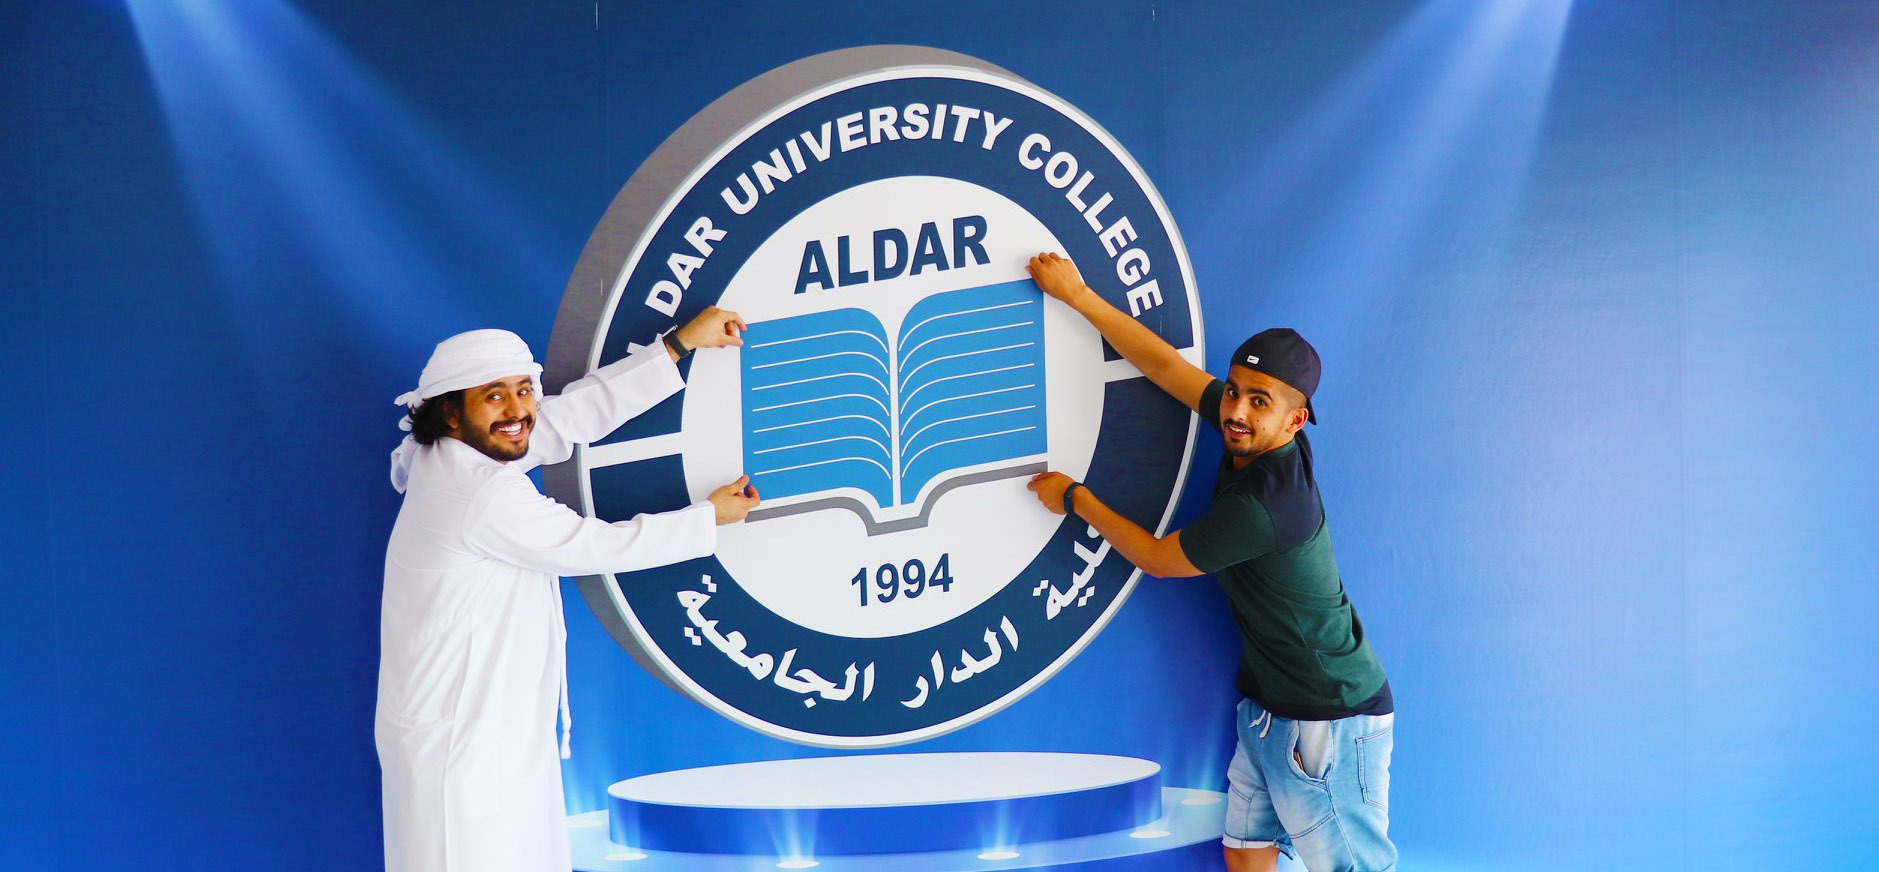 students with logo of Al Dar University College